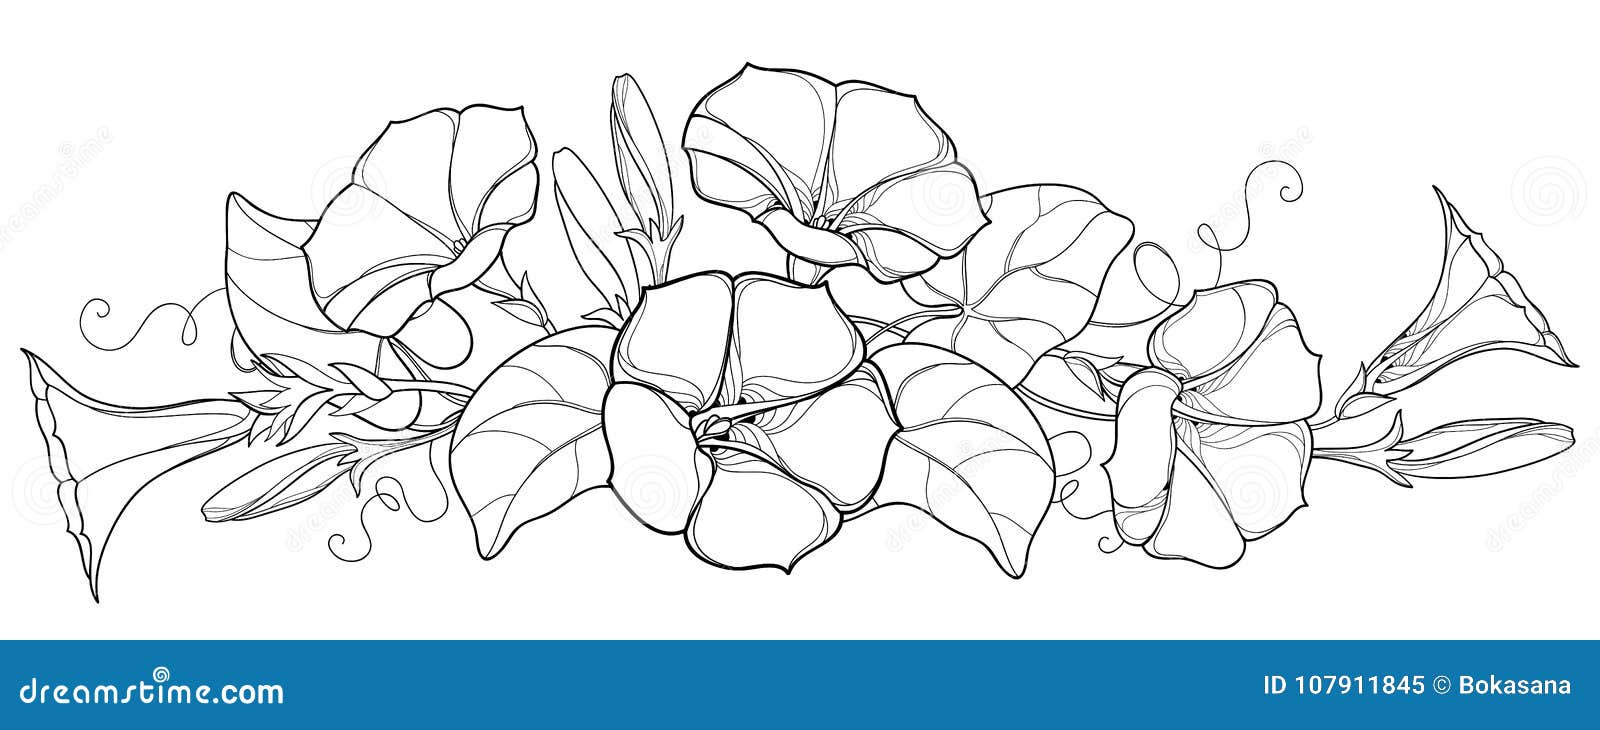  bunch with outline ipomoea or morning glory flower bell, leaf and bud in black  on white background.